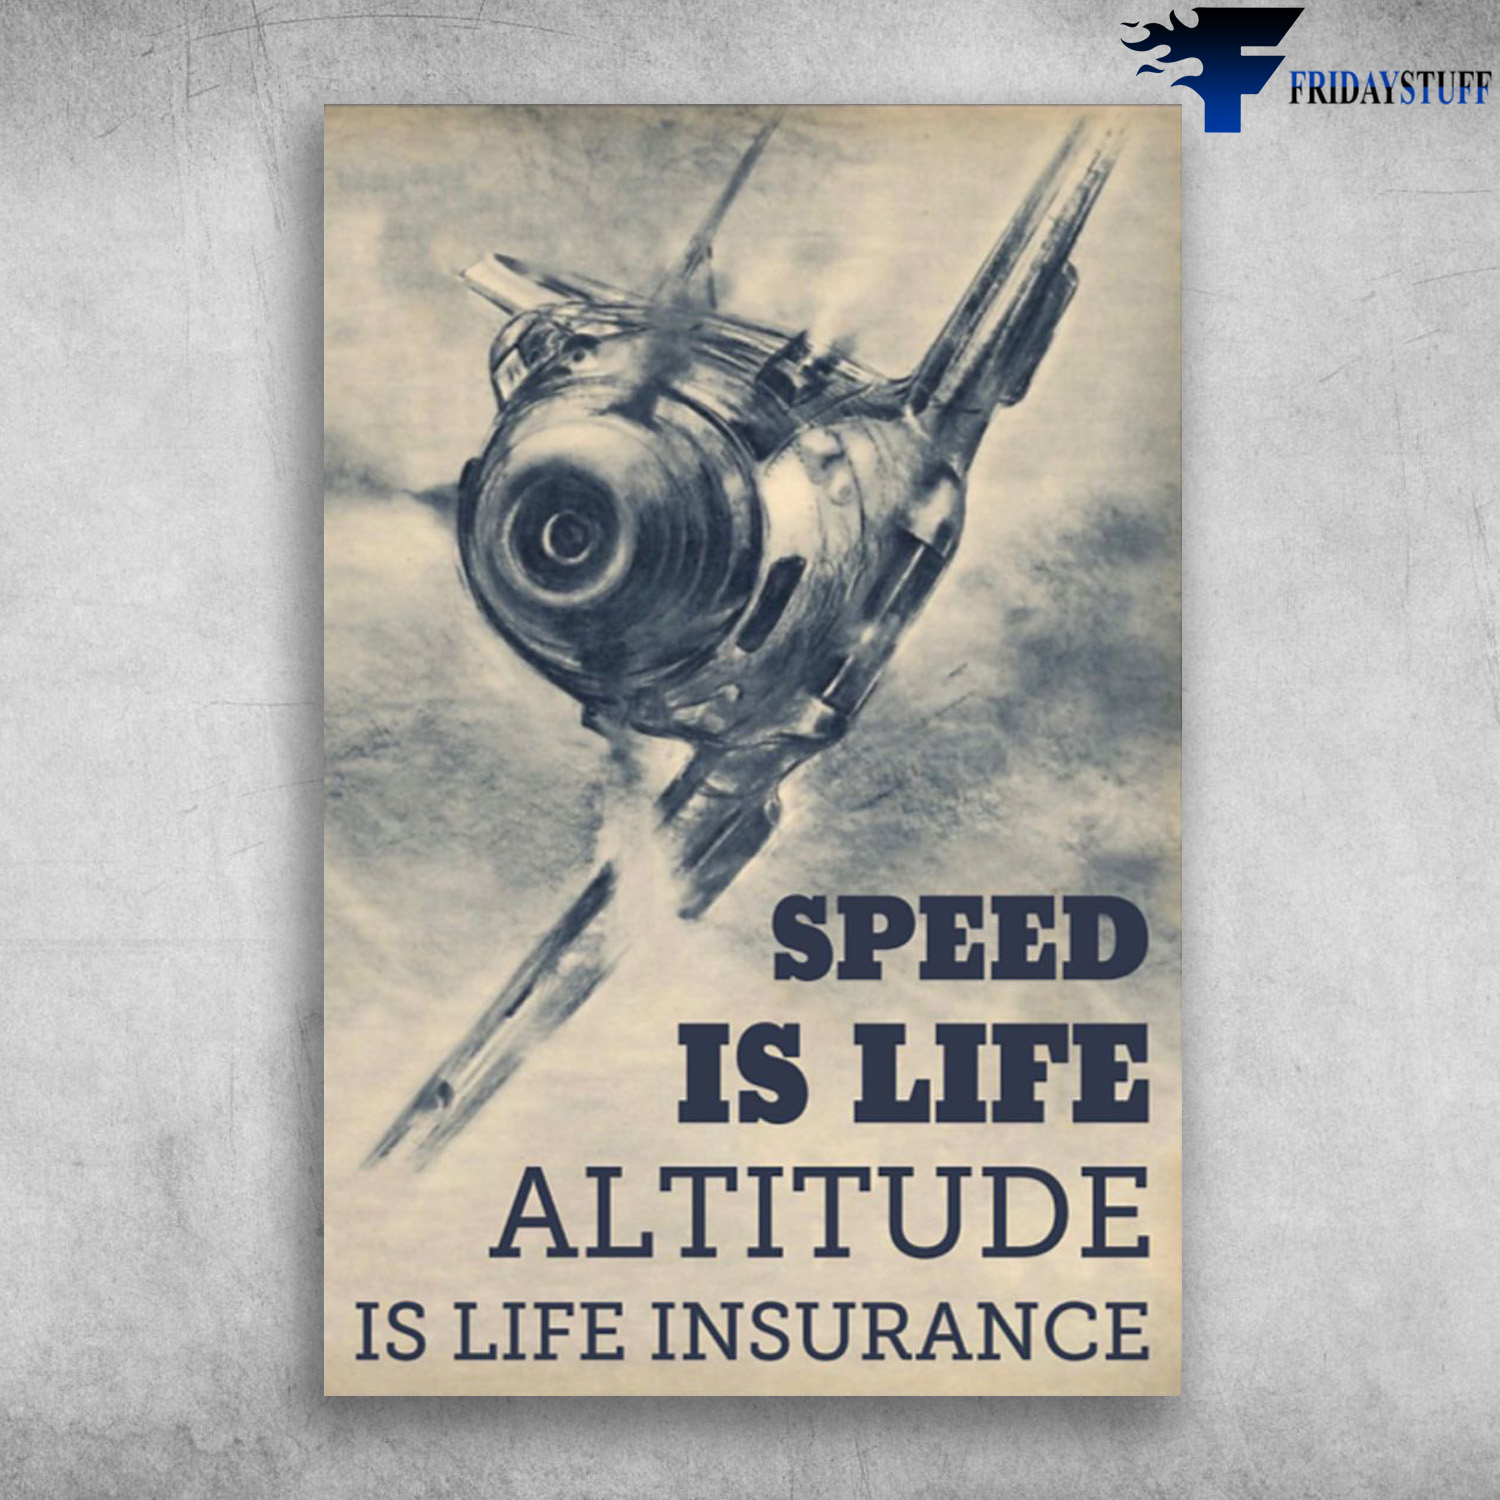 The Airplane - Speed Is Life, Altitude Is Life Insurance.